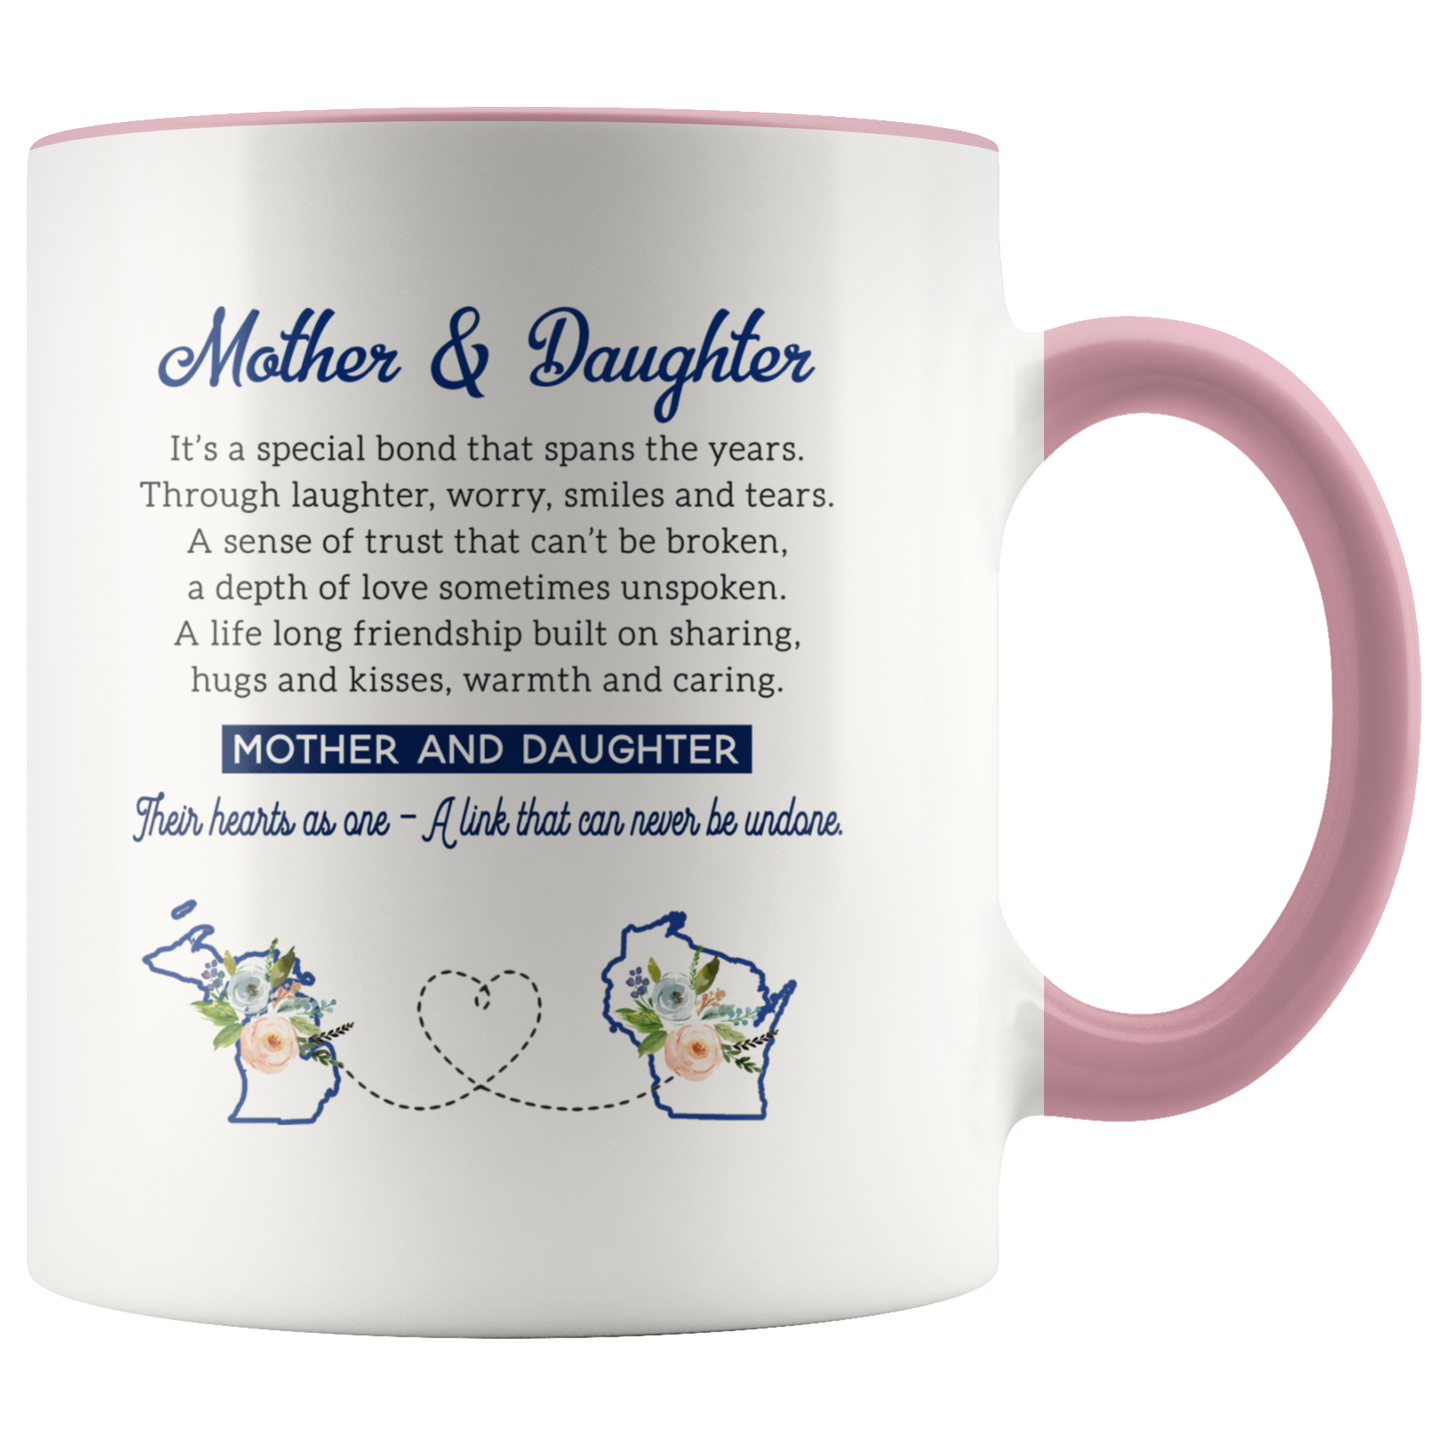 ND-21357706-sp-23145 - Long Distance Mom And Daughter Gifts - Mother And Daughter.